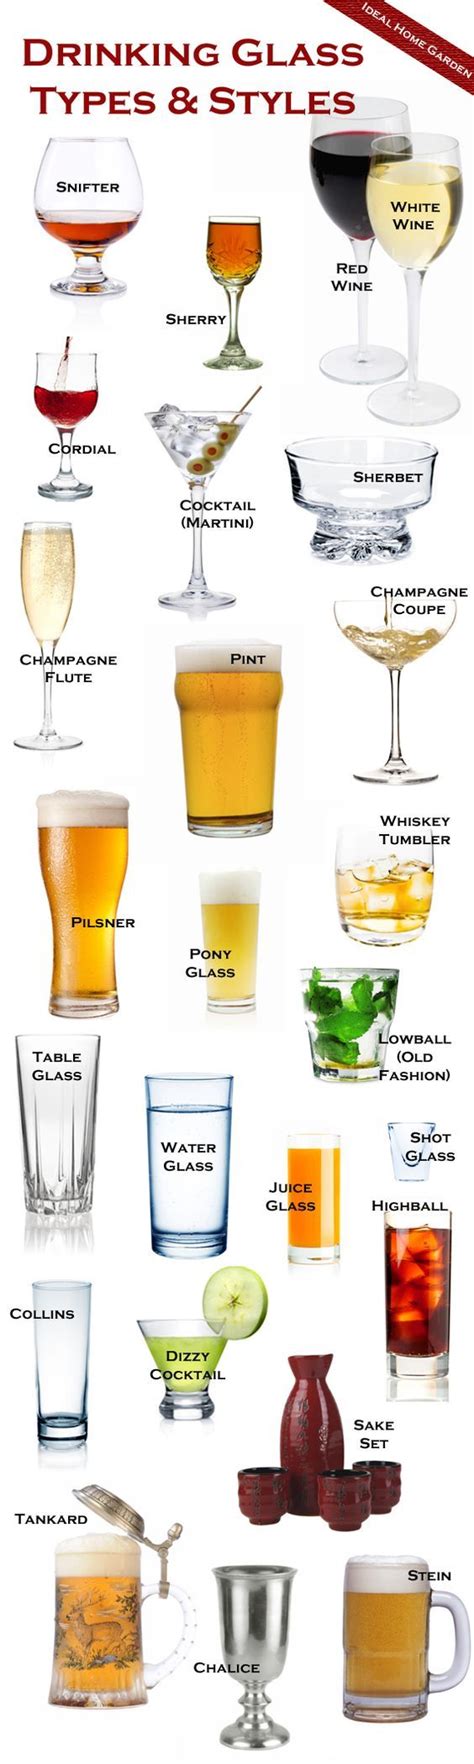 The Different Types Of Drinking Glasses And Explanations Of What They